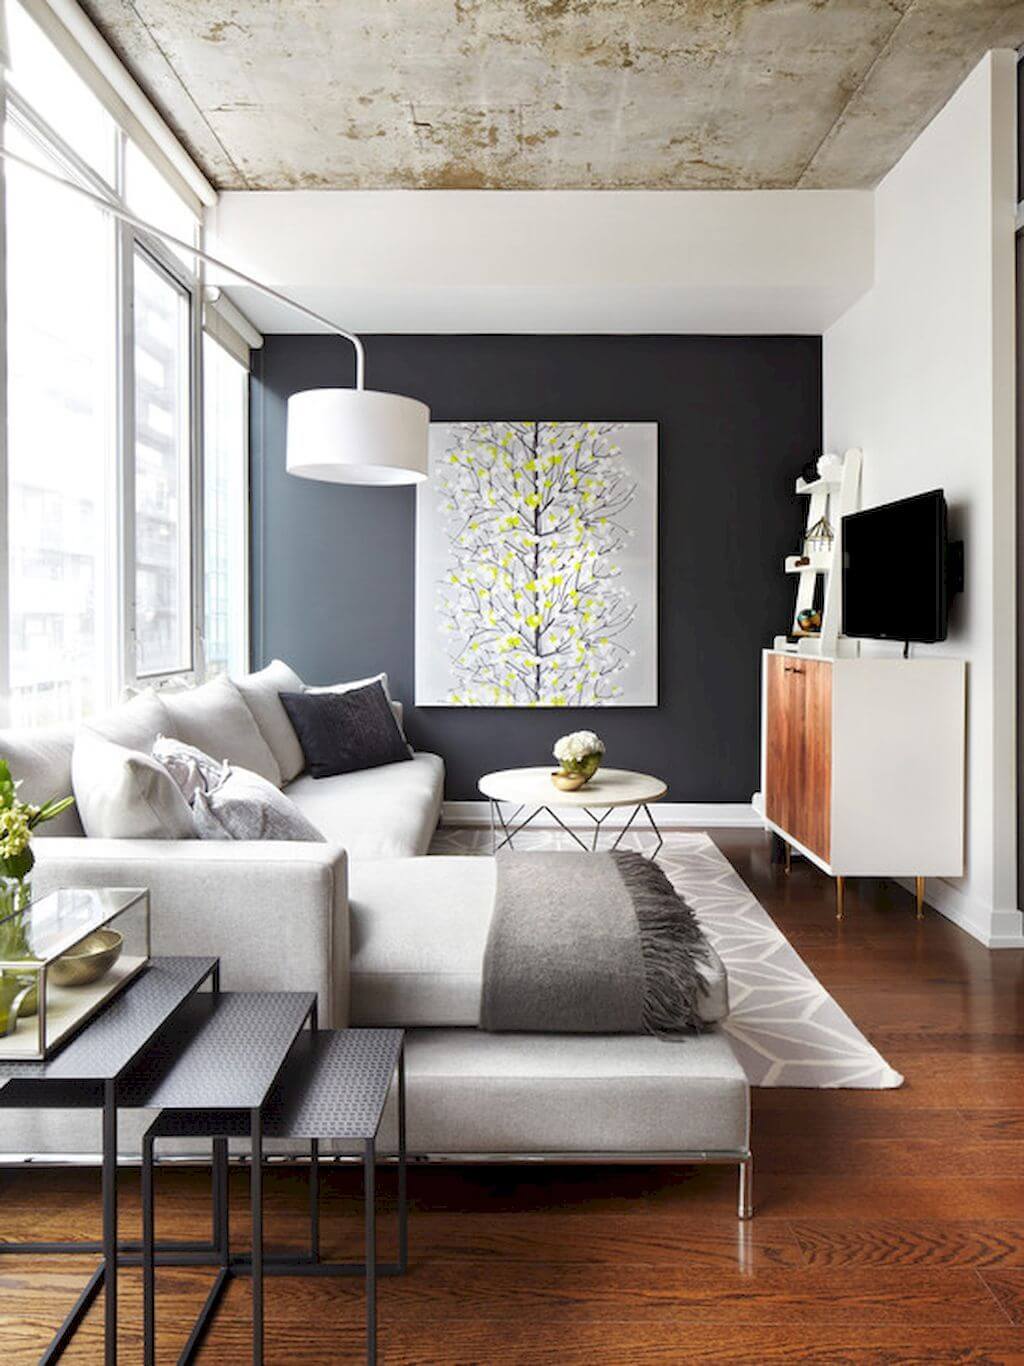 Contemporary Room with Wall Art